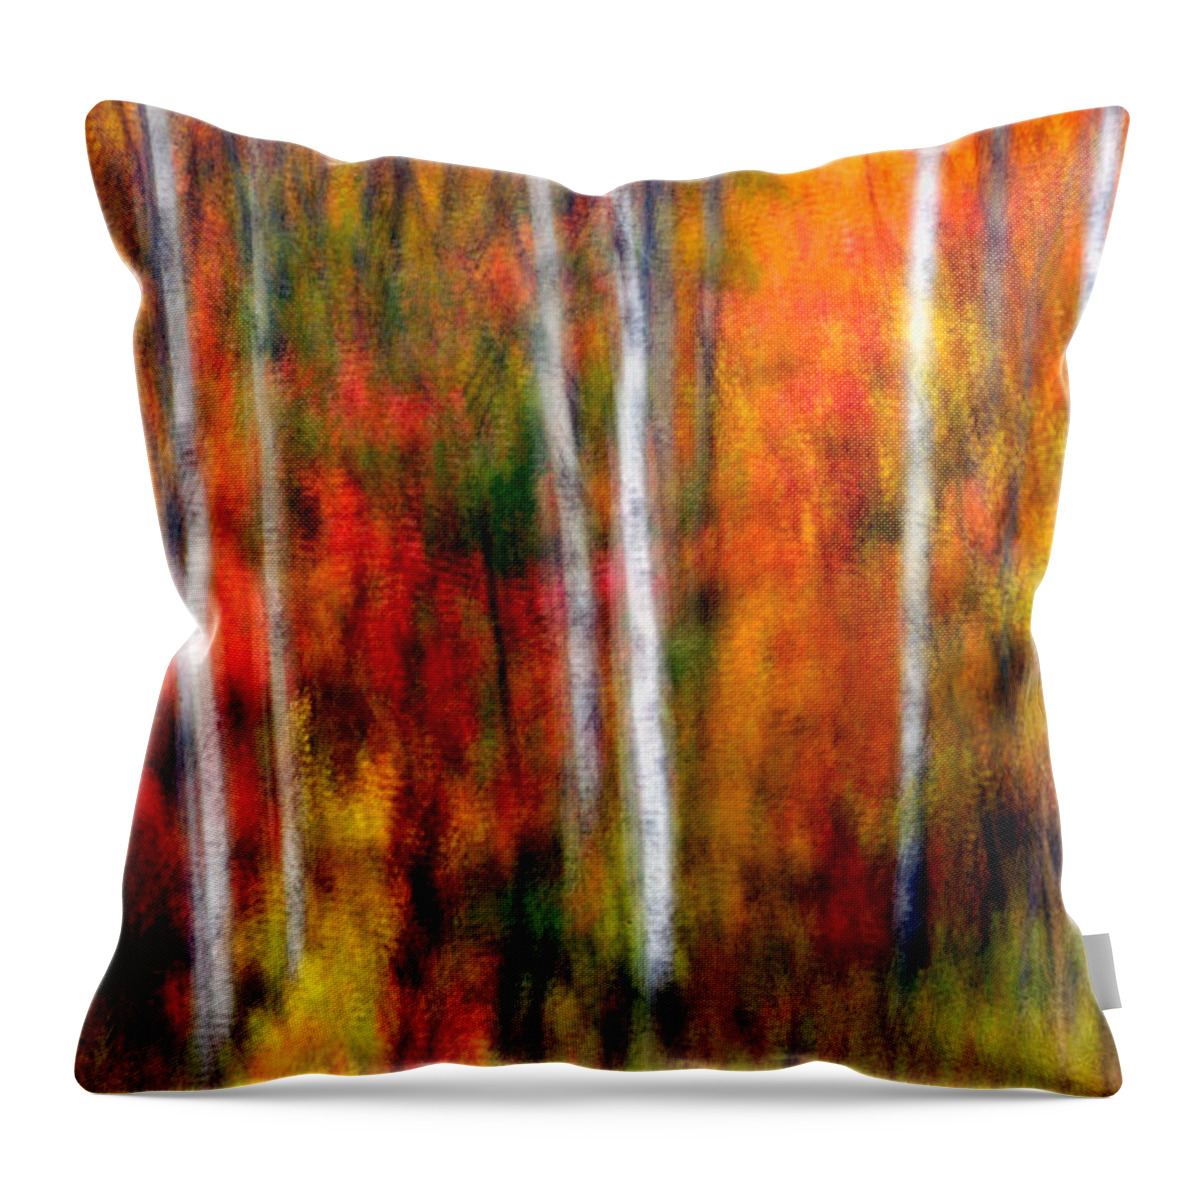 Canada Throw Pillow featuring the photograph Autumn Dreams by Doug Gibbons